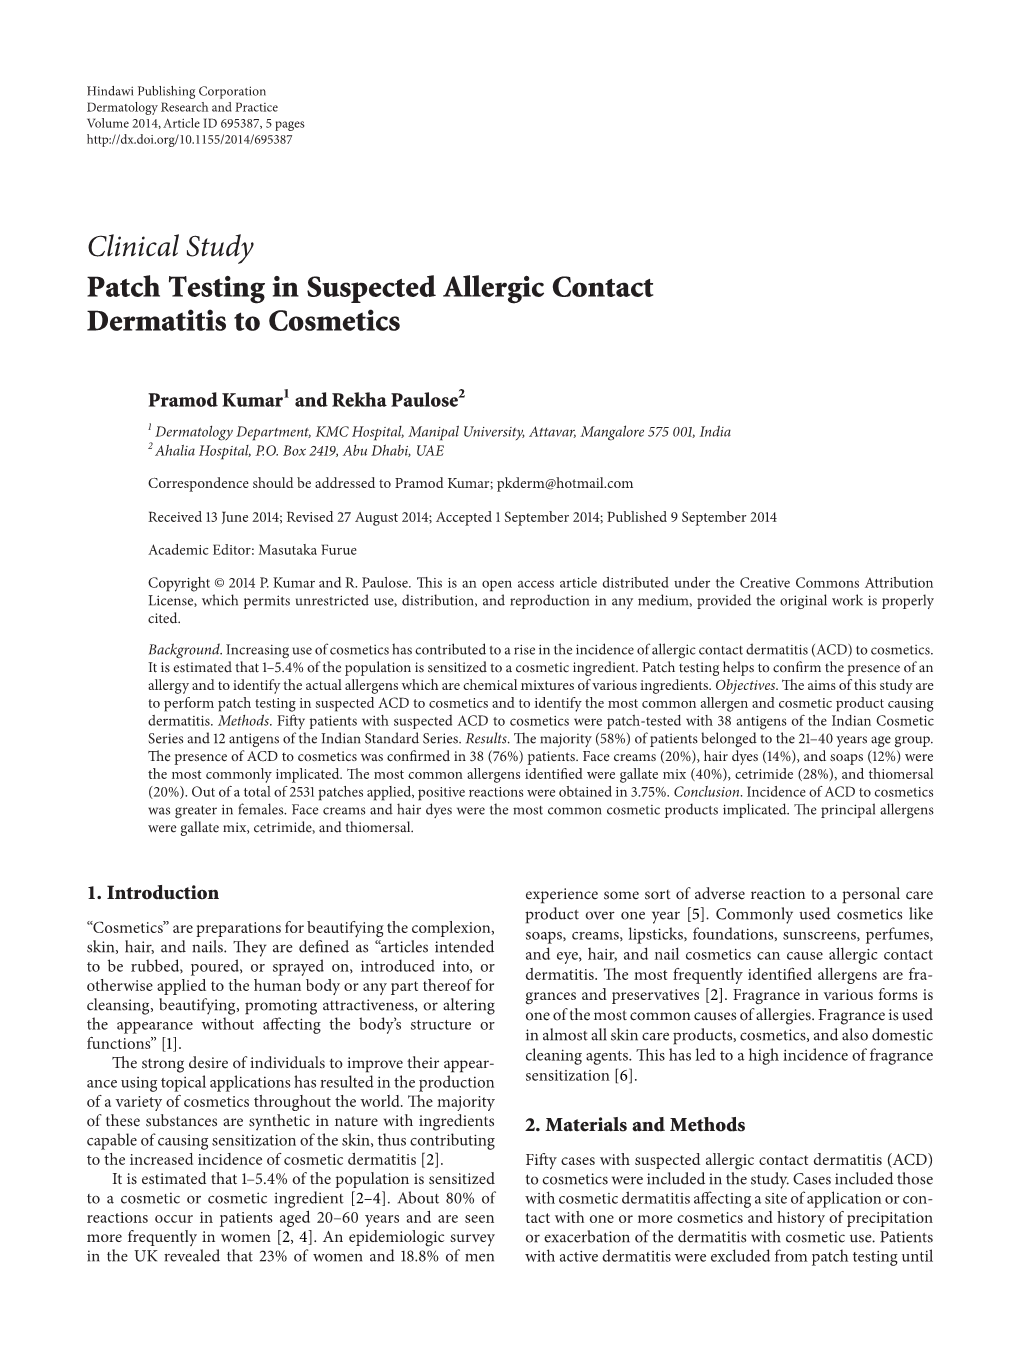 Patch Testing in Suspected Allergic Contact Dermatitis to Cosmetics